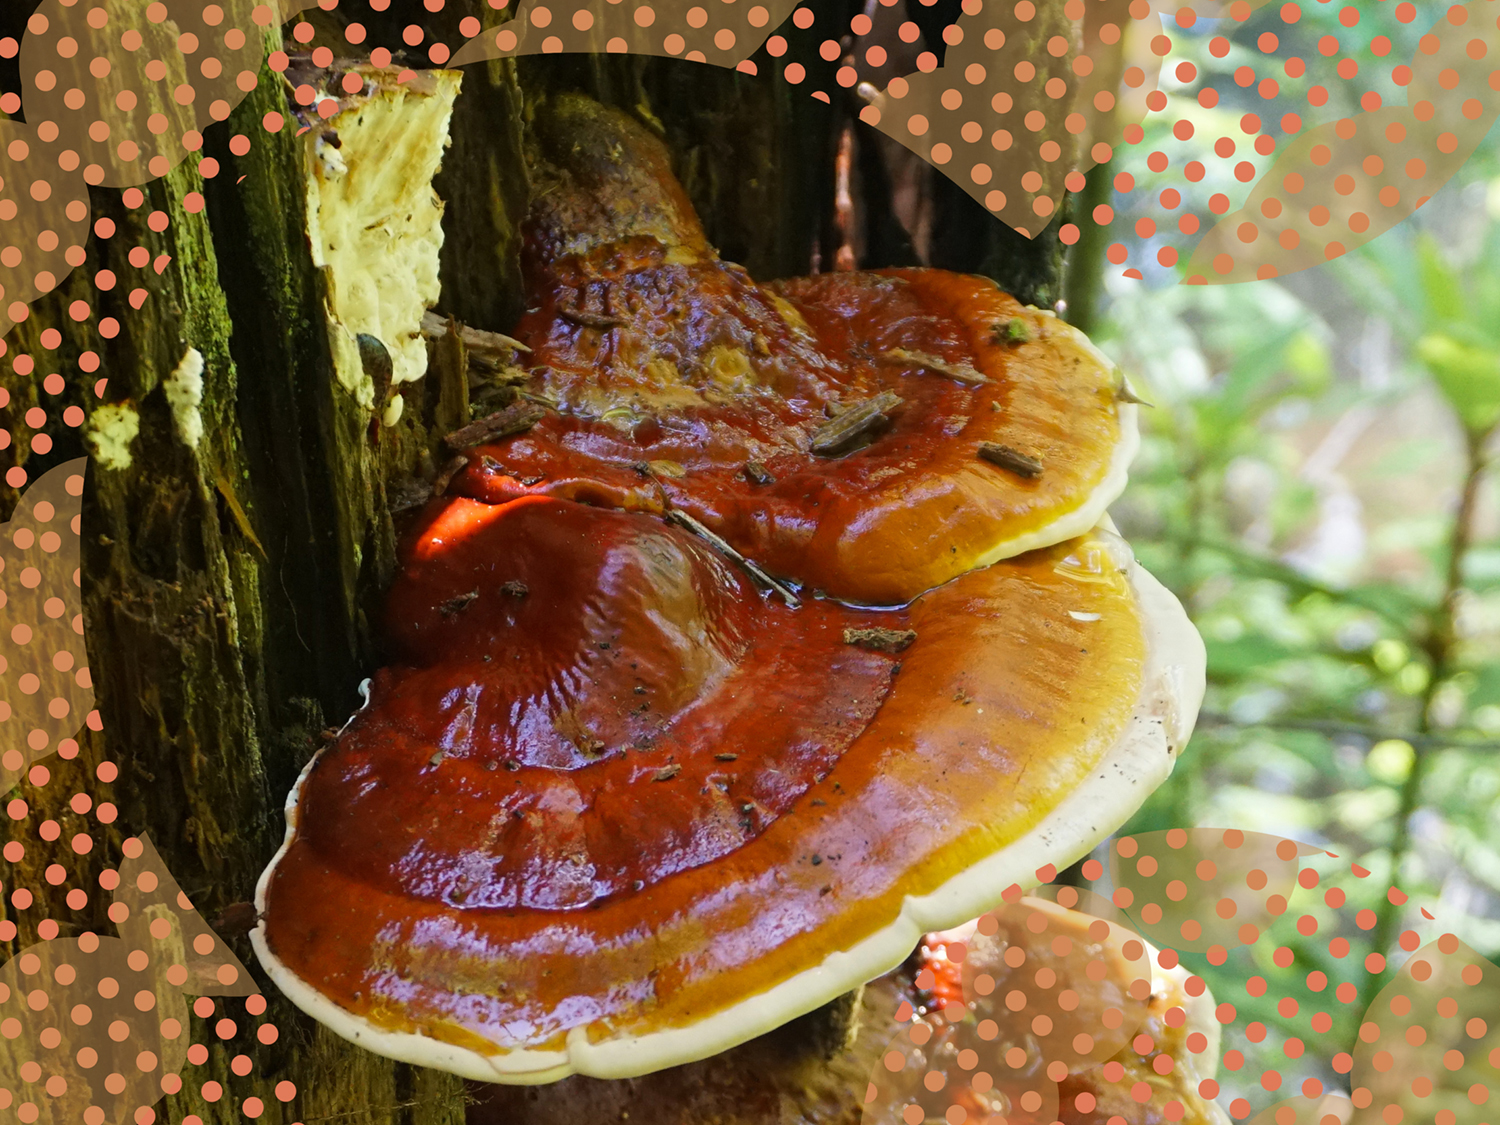 Ep. 89: Turning mushrooms into leather and foam